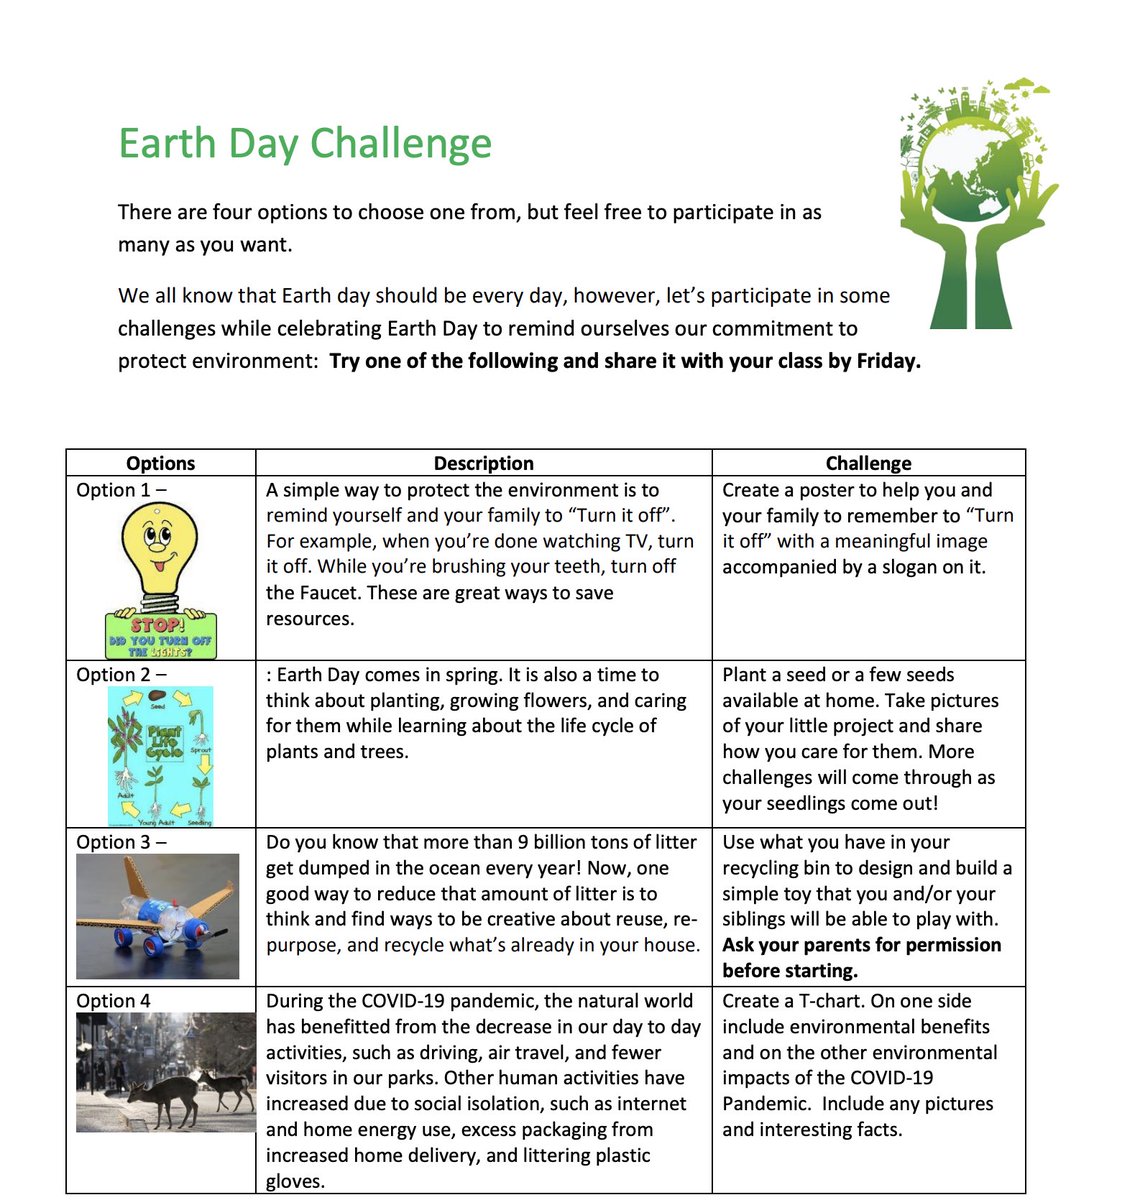 For last week’s School Challenge, our students picked an from several activities related to Earth Day. Students created new items from recycled materials and posters with energy saving tips to share at home. Great job, students! @LC3_TDSB